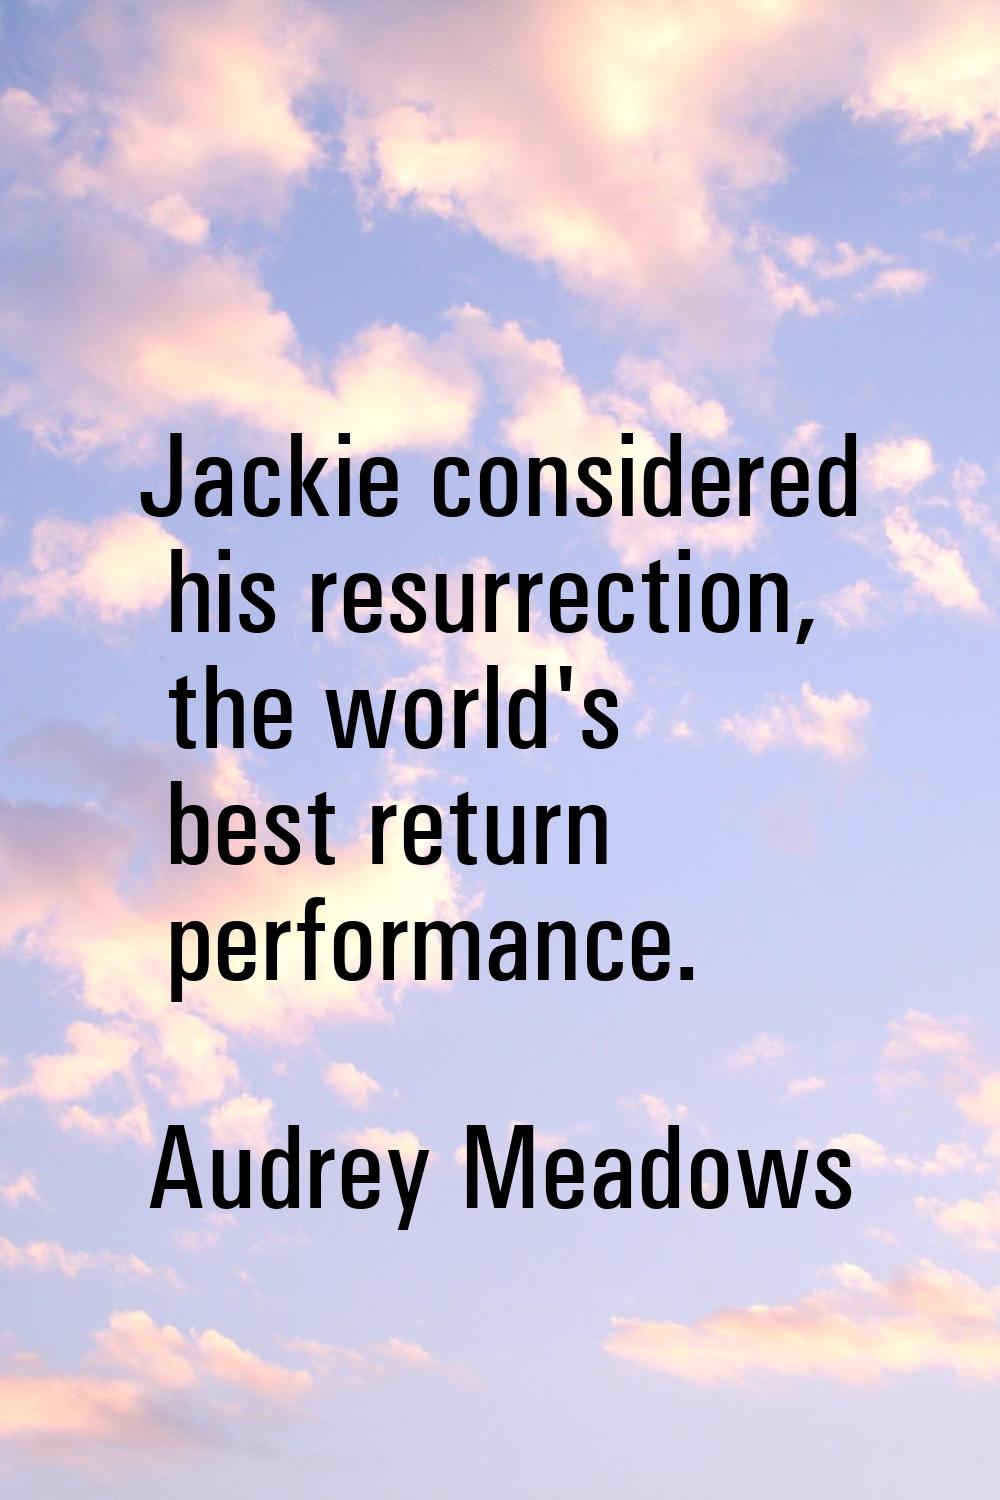 Jackie considered his resurrection, the world's best return performance.